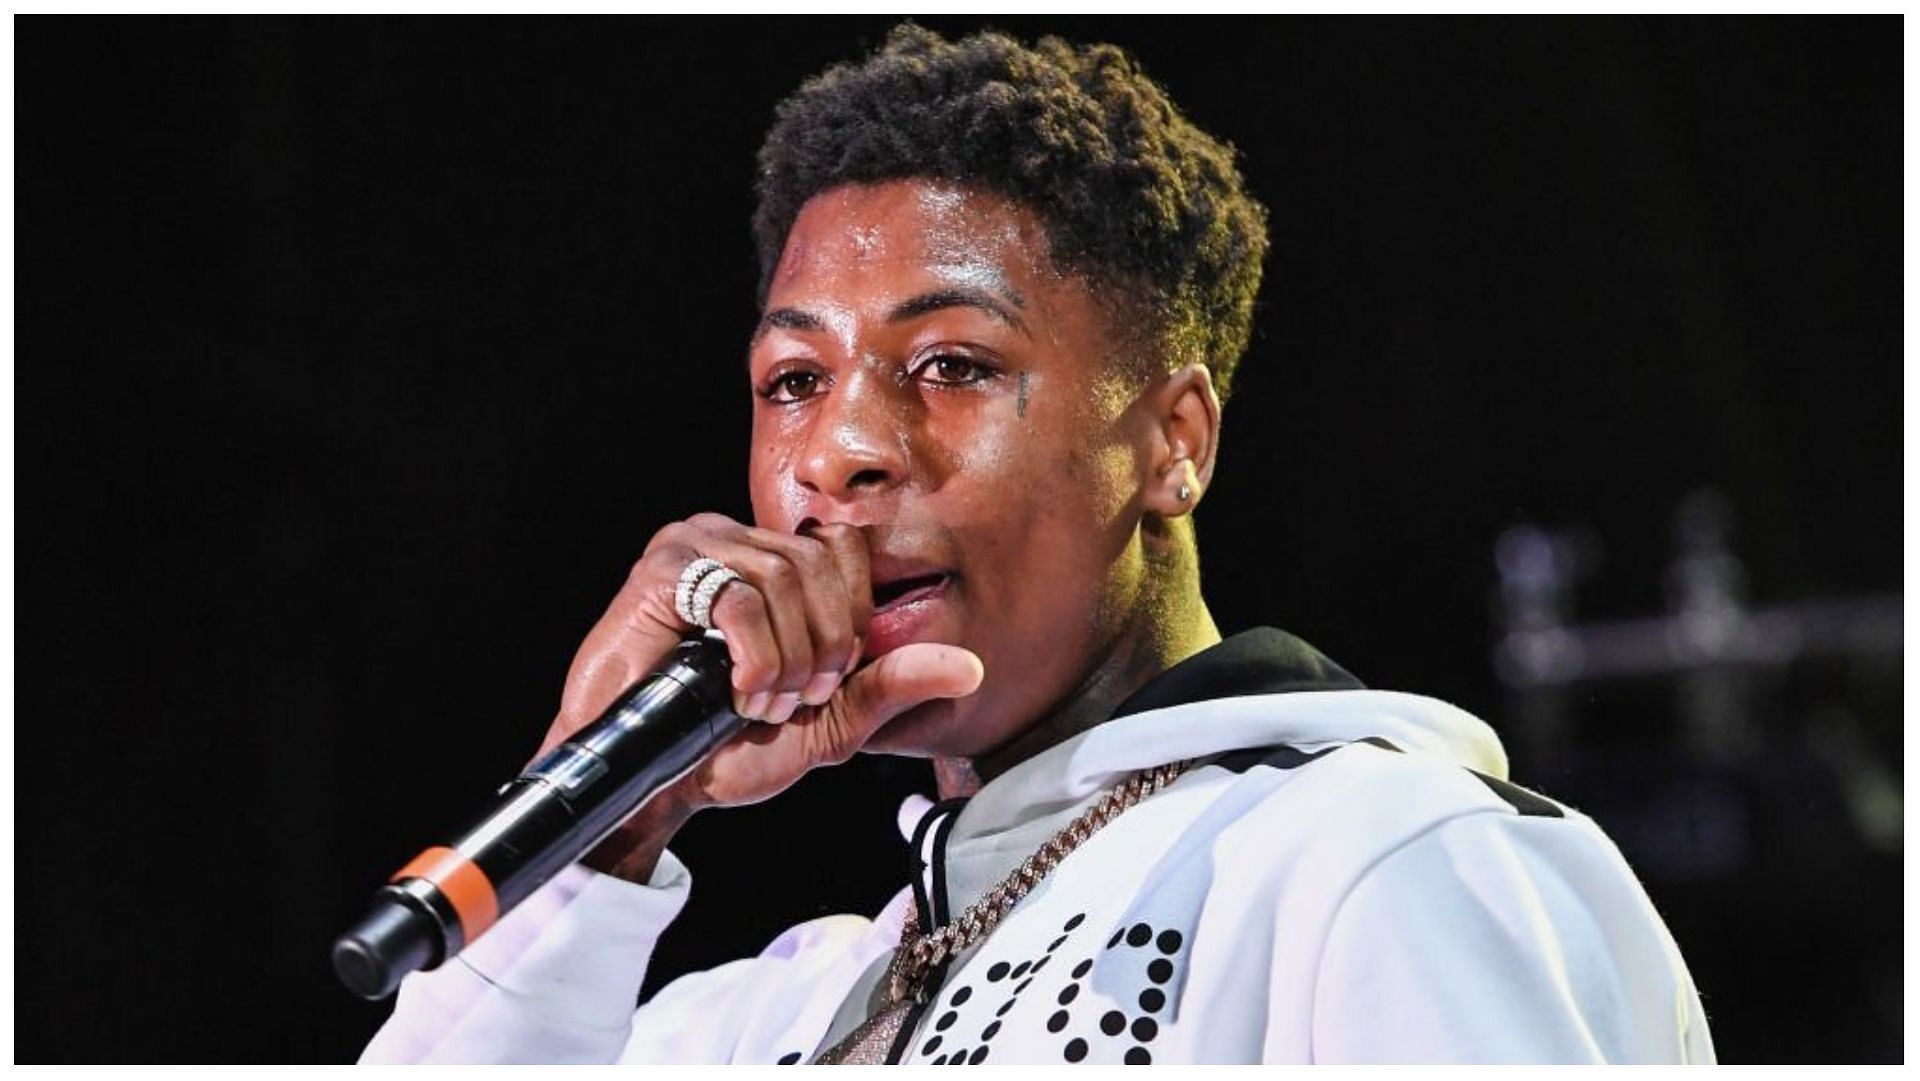 At what age did NBA Youngboy have his first child?